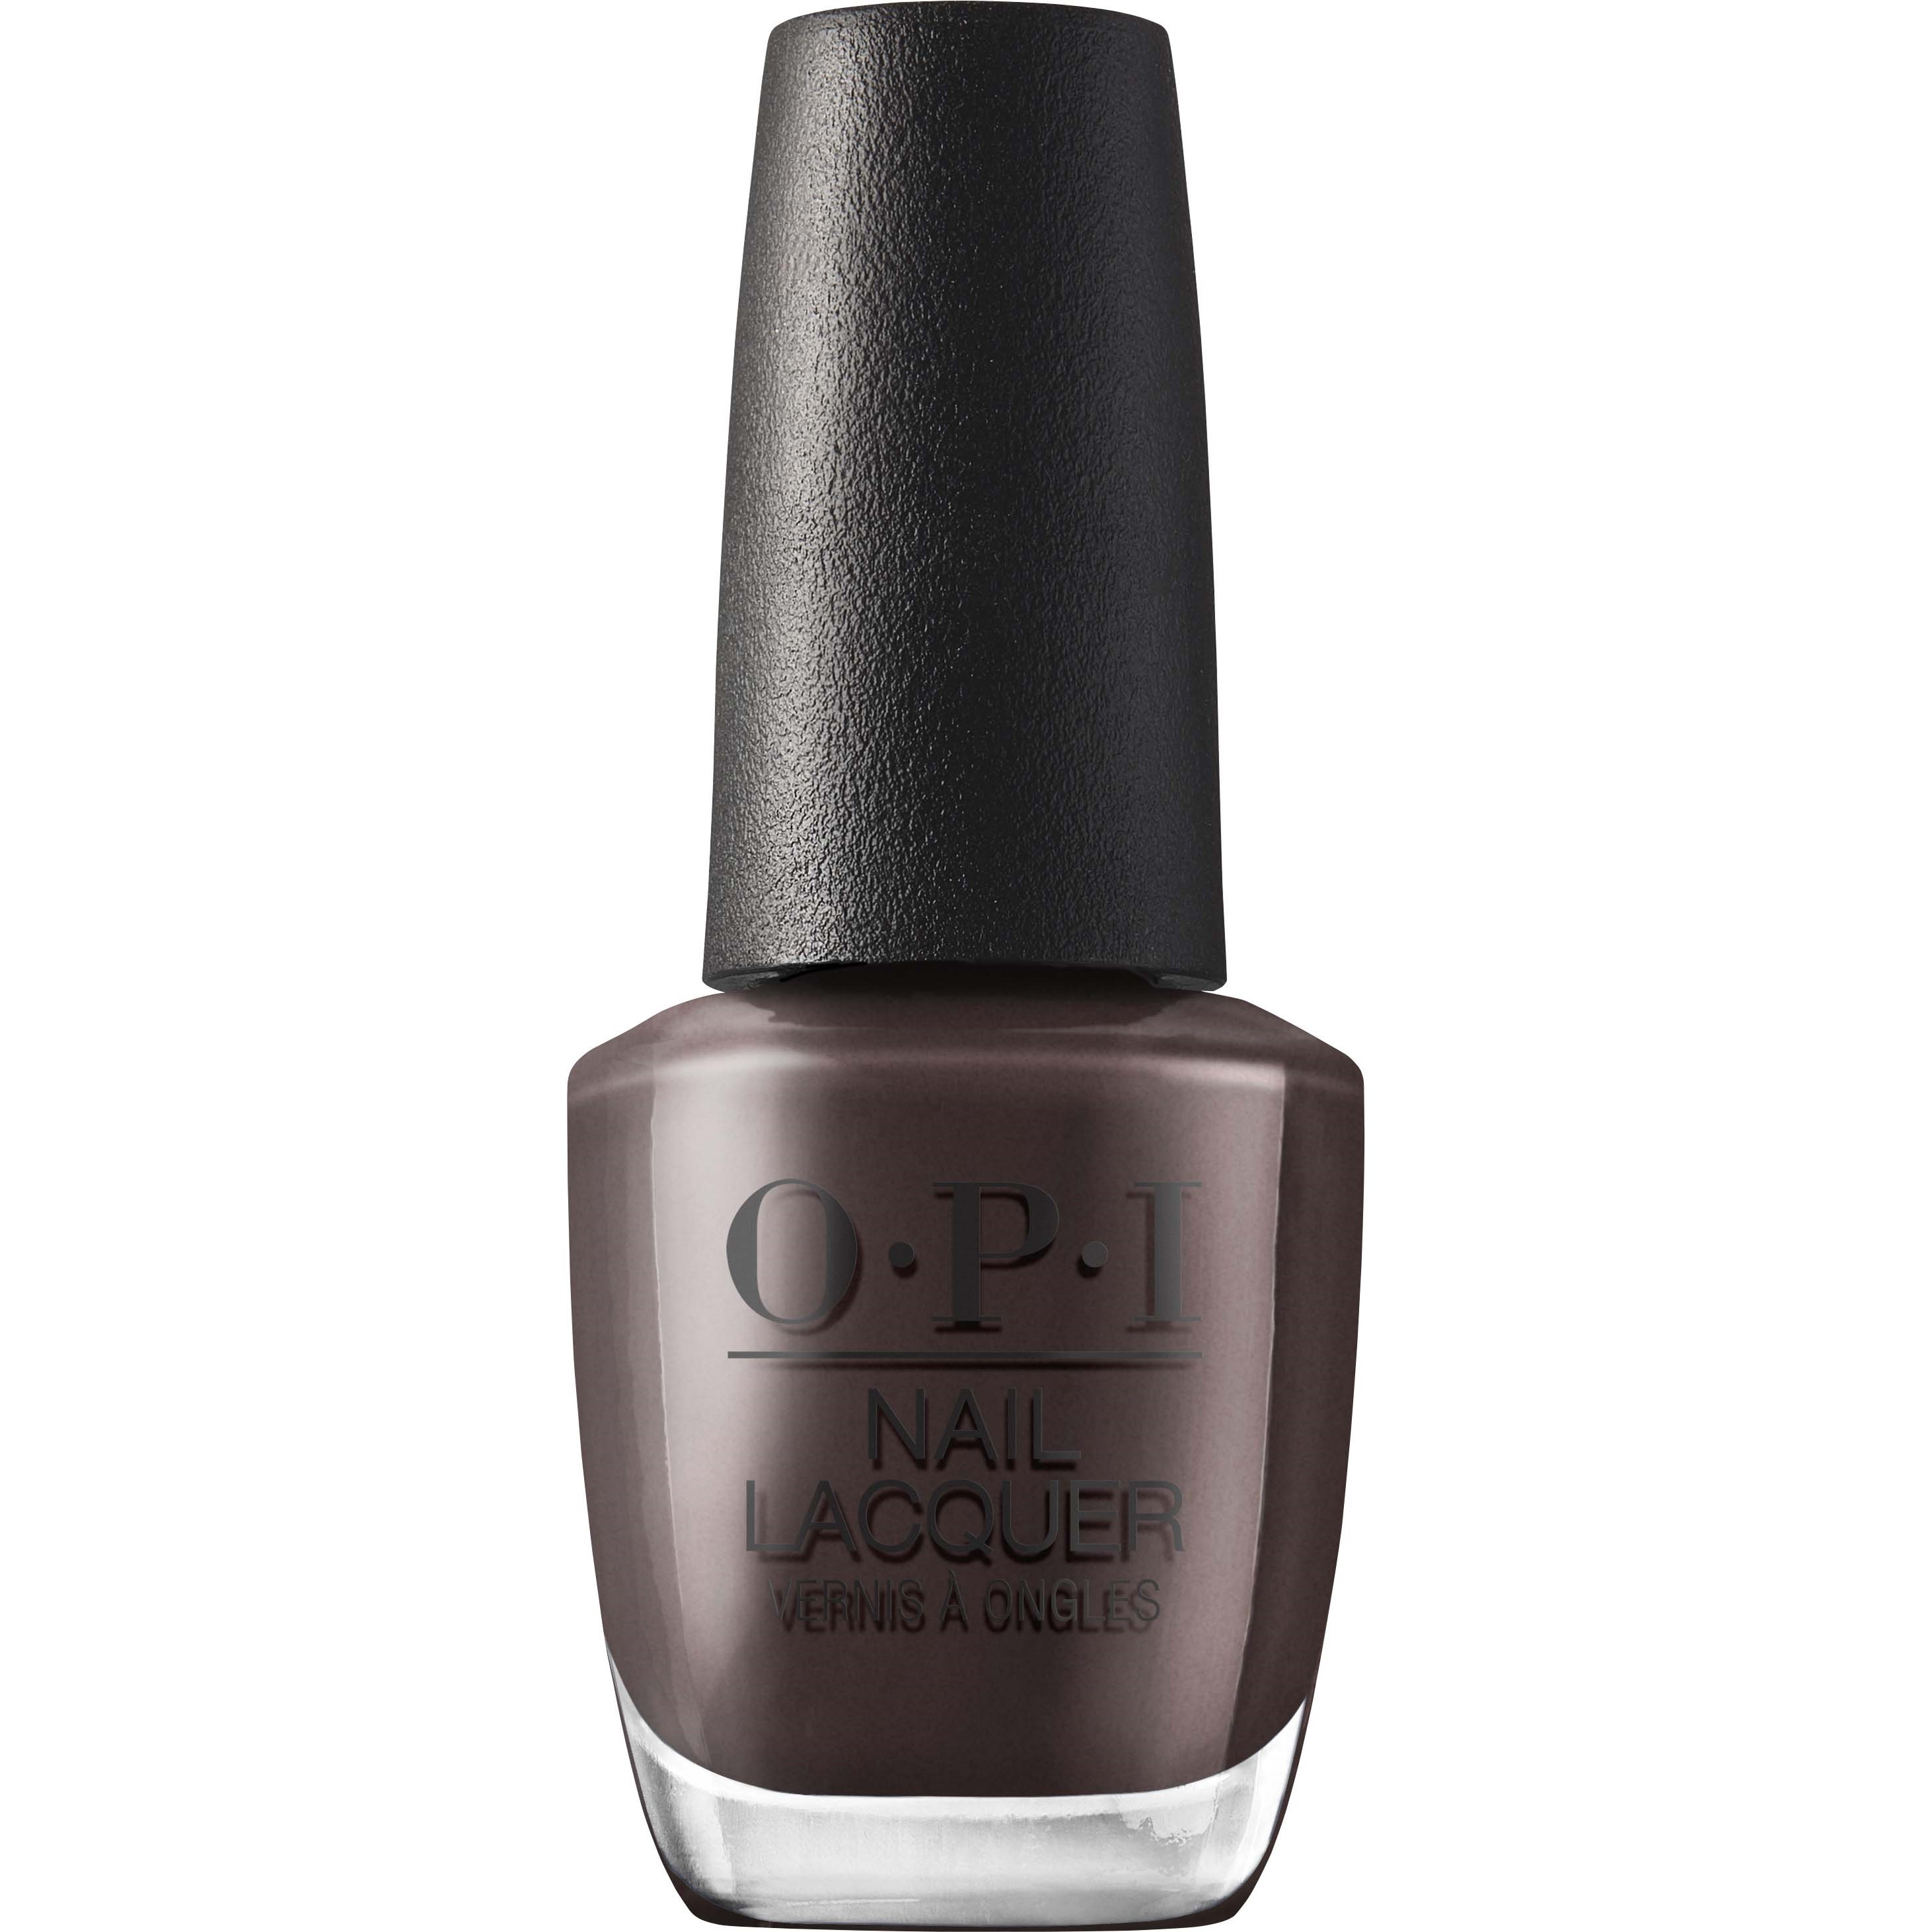 OPI Fall '22 Fall Wonders Nail Lacquer Broen to Earth